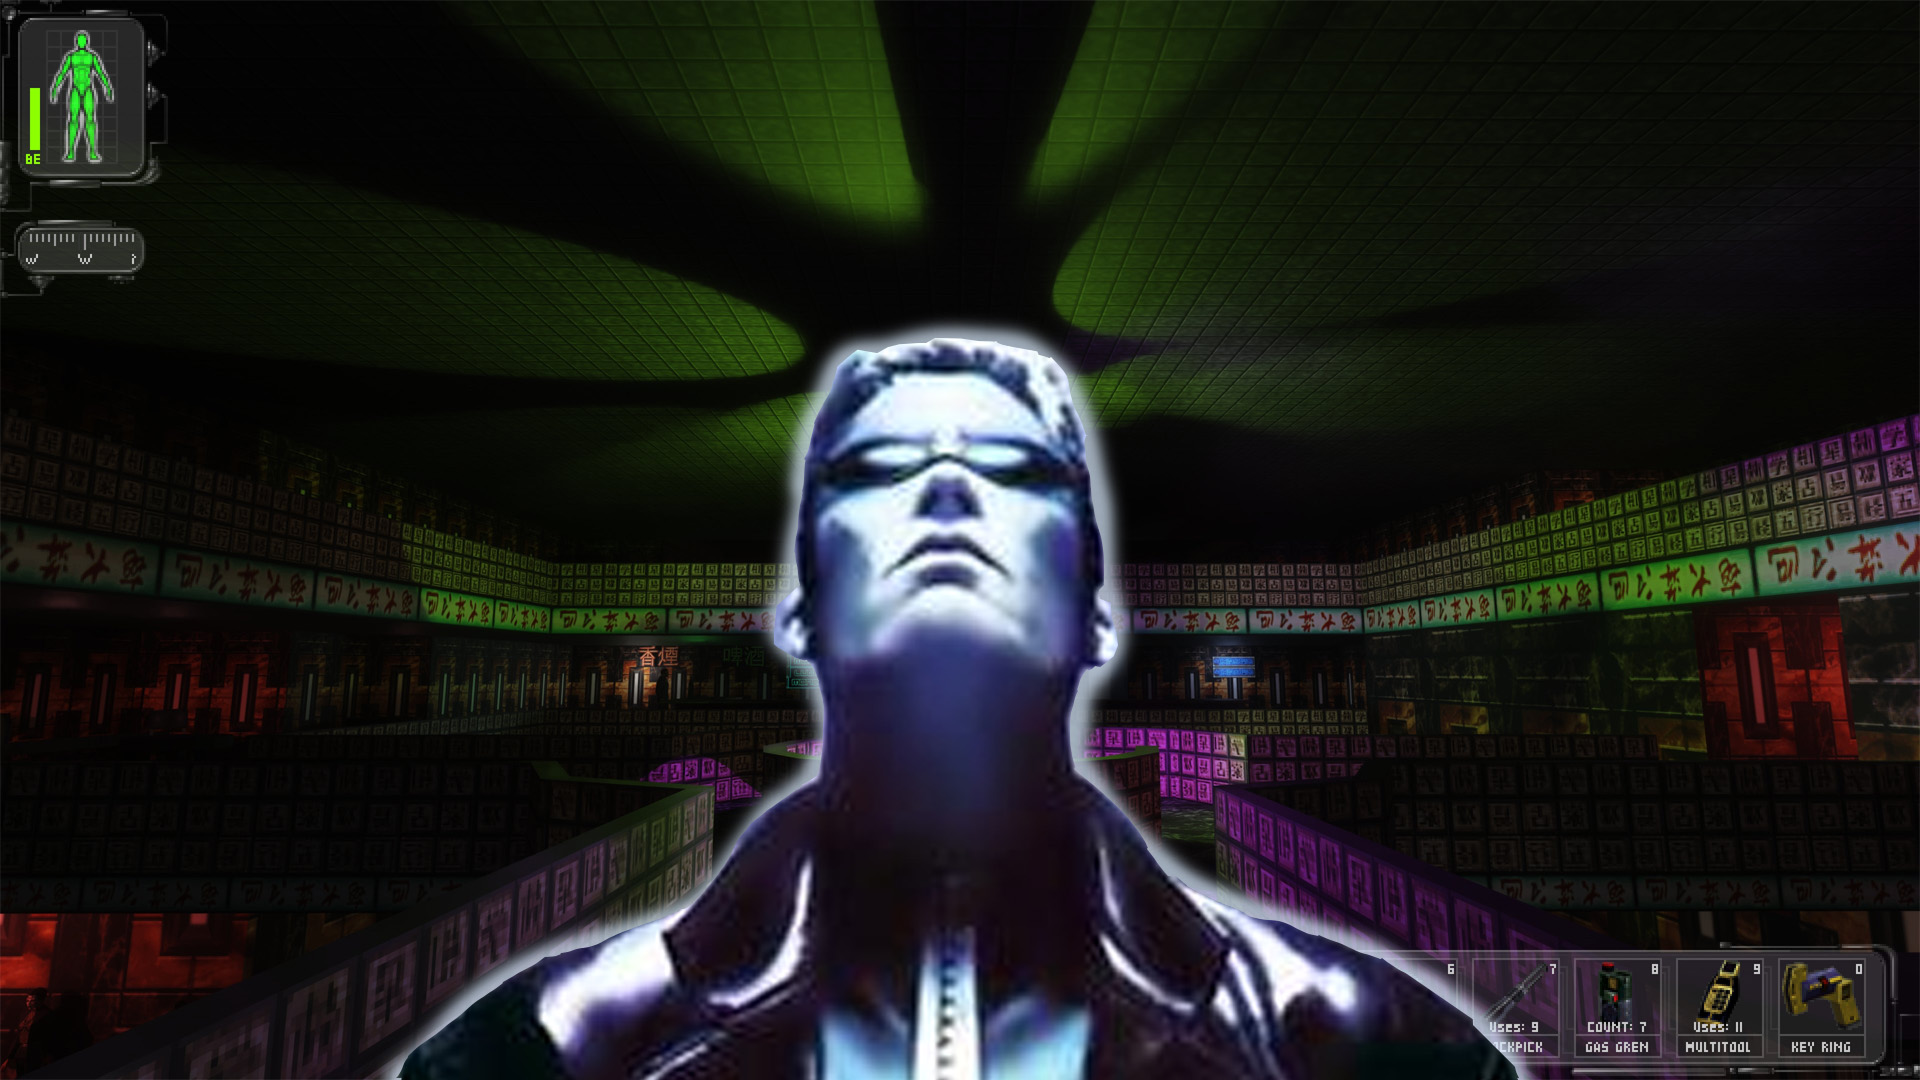 Deus Ex RTX Remix proves again that ray tracing is best on old games